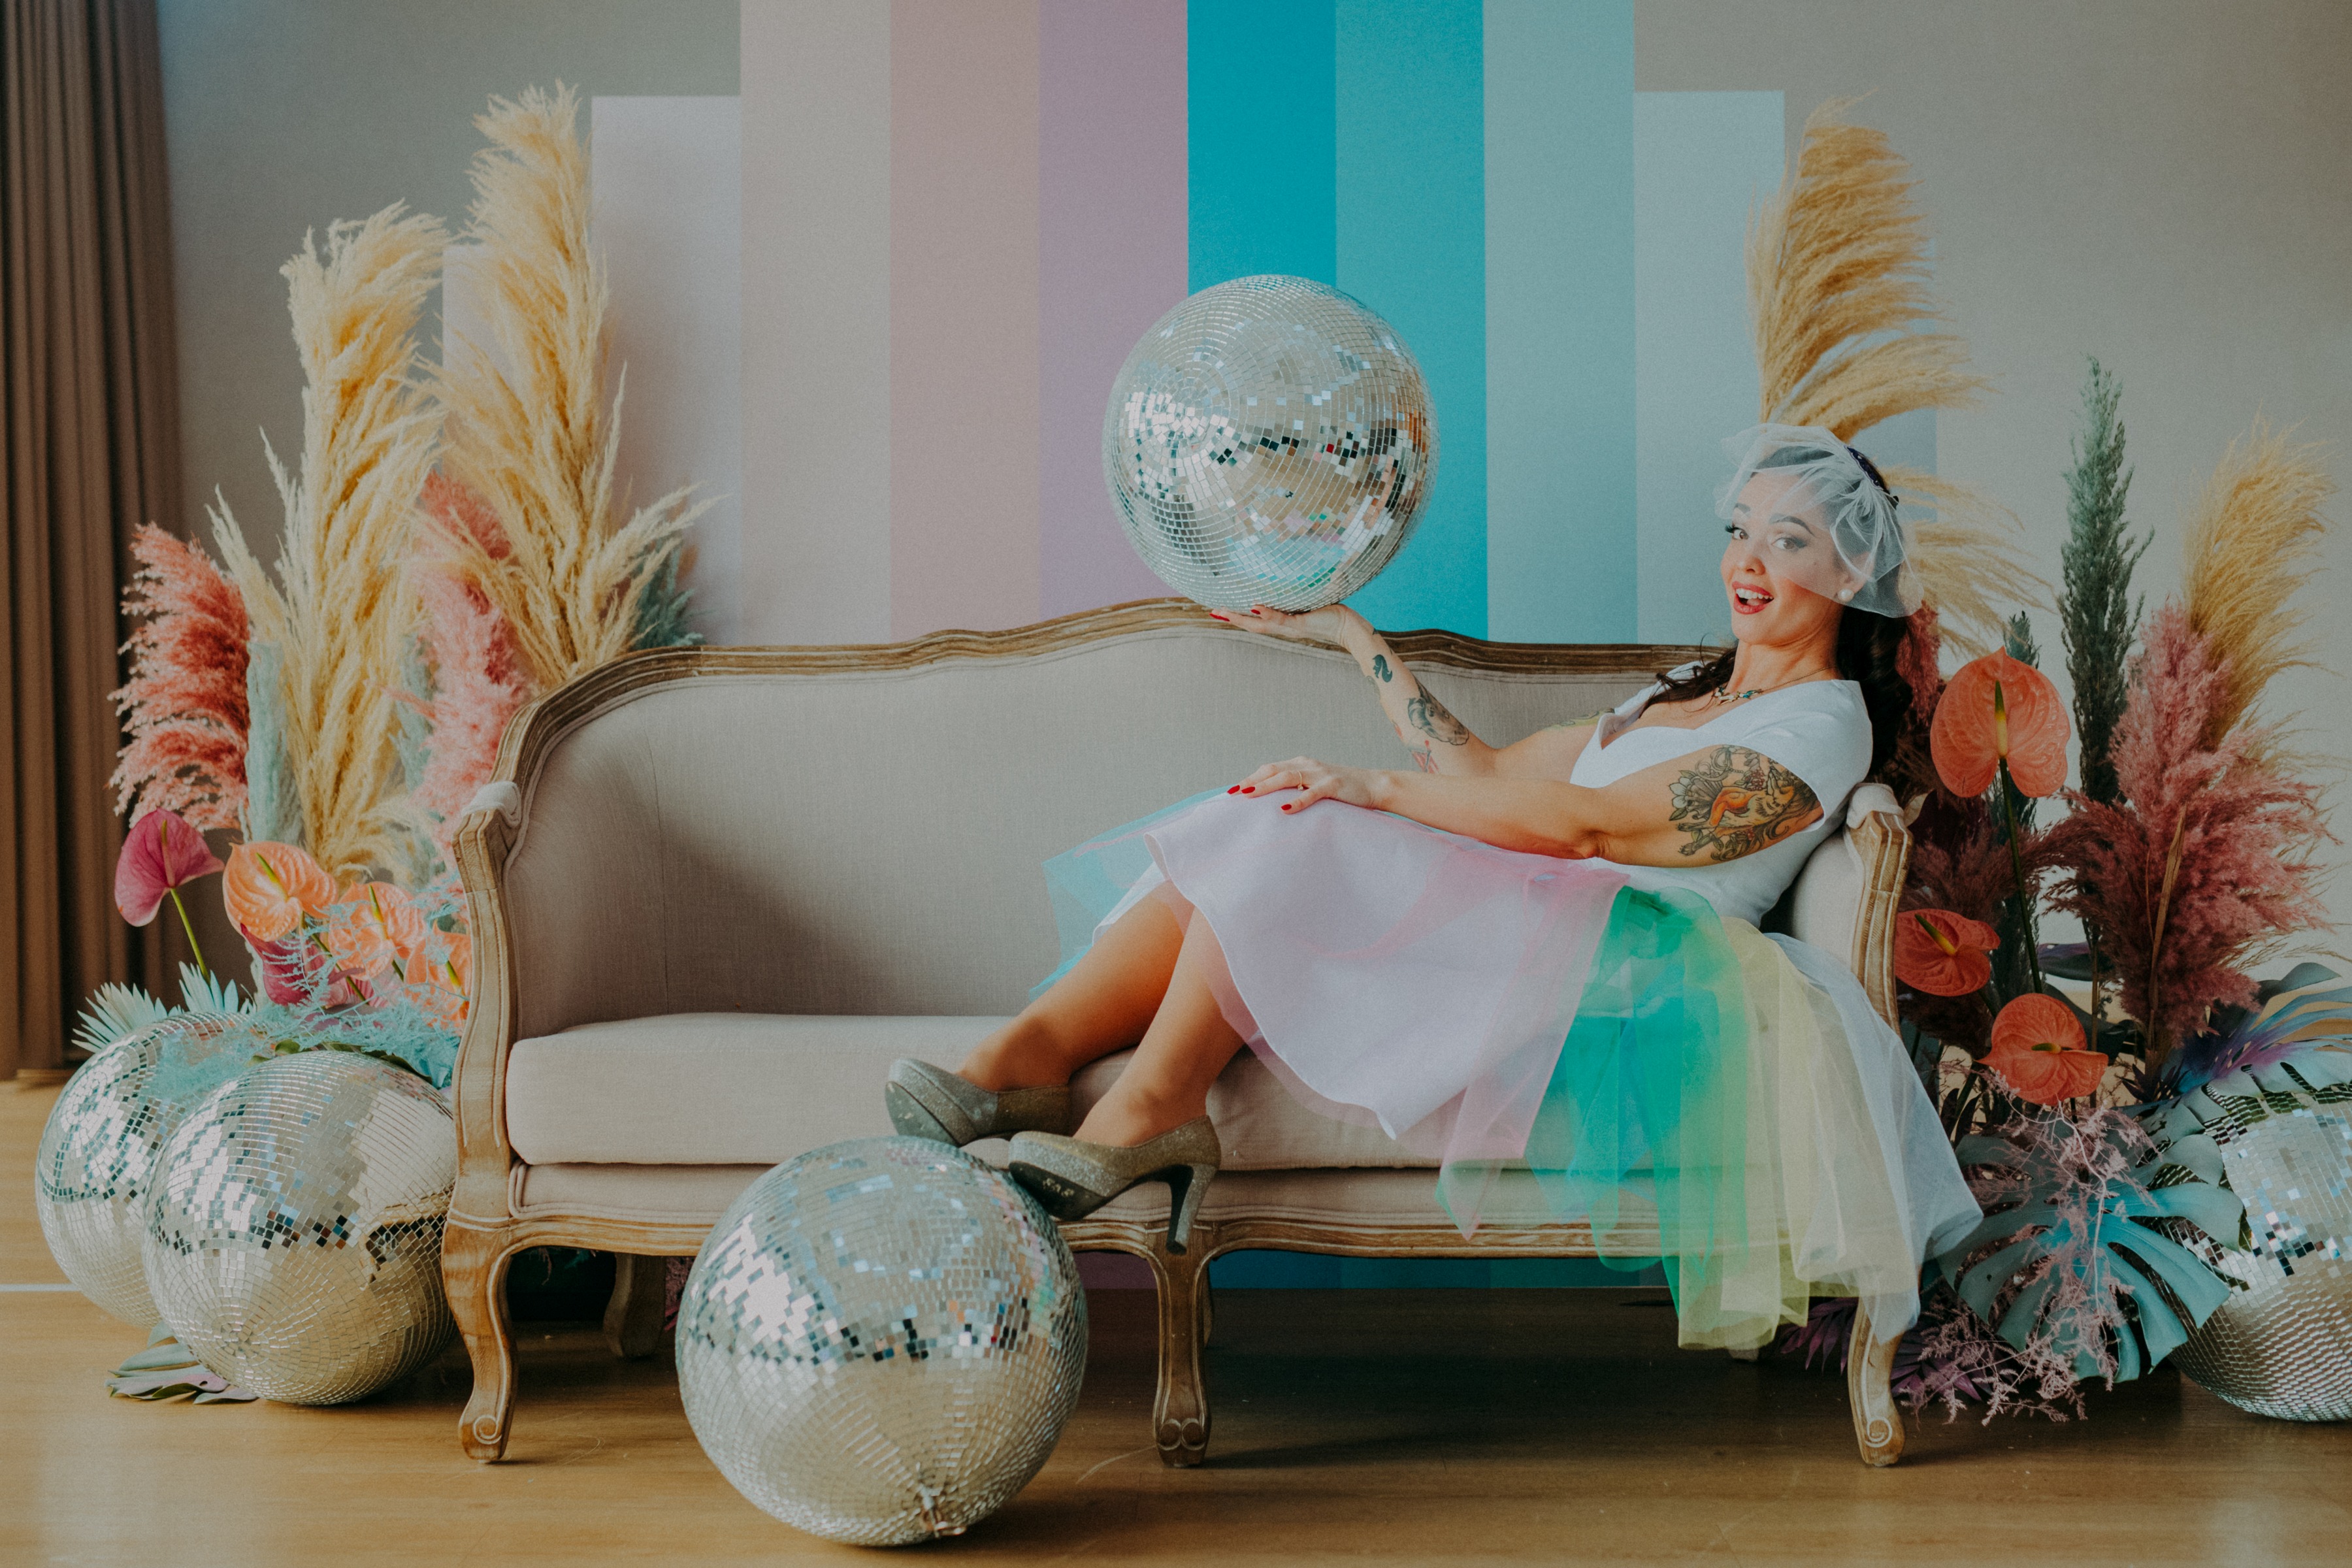 colourful pastel wedding - unconventional wedding - alternative wedding - colourful wedding dress - unique wedding dress - alternative wedding dress - unique retro wedding dress - alternative bridal wear - fun bridal look